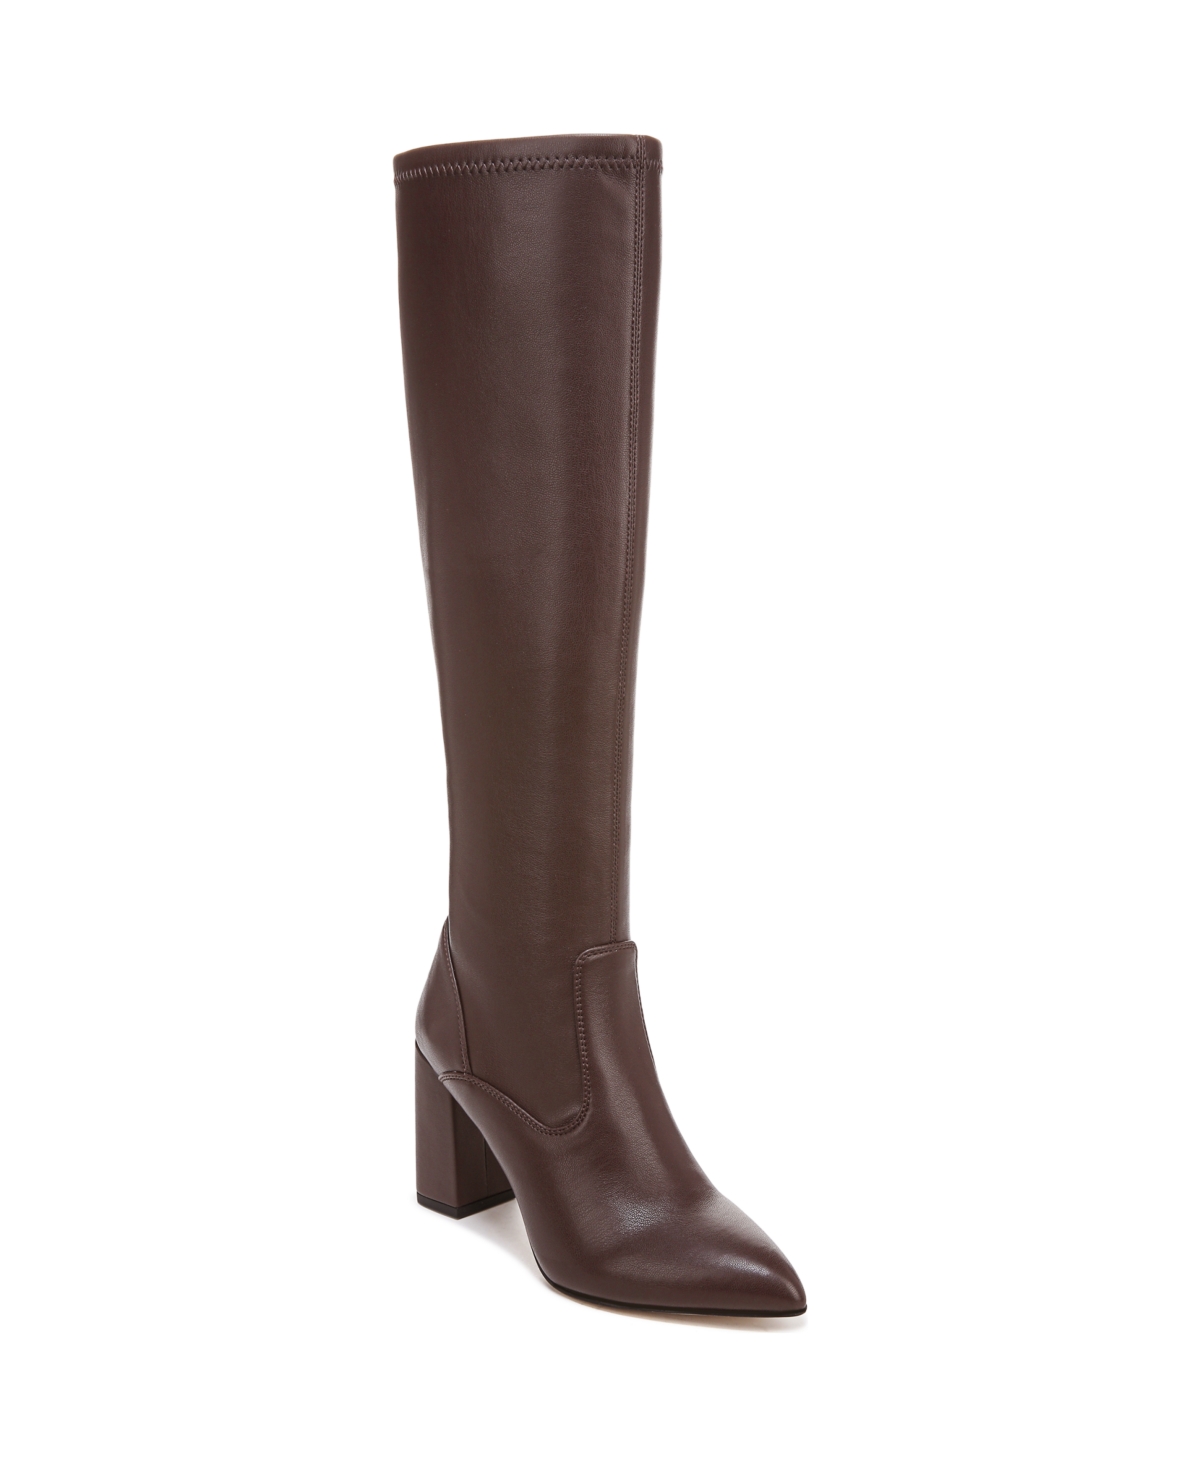 Katherine Knee High Boots - Black Faux Leather